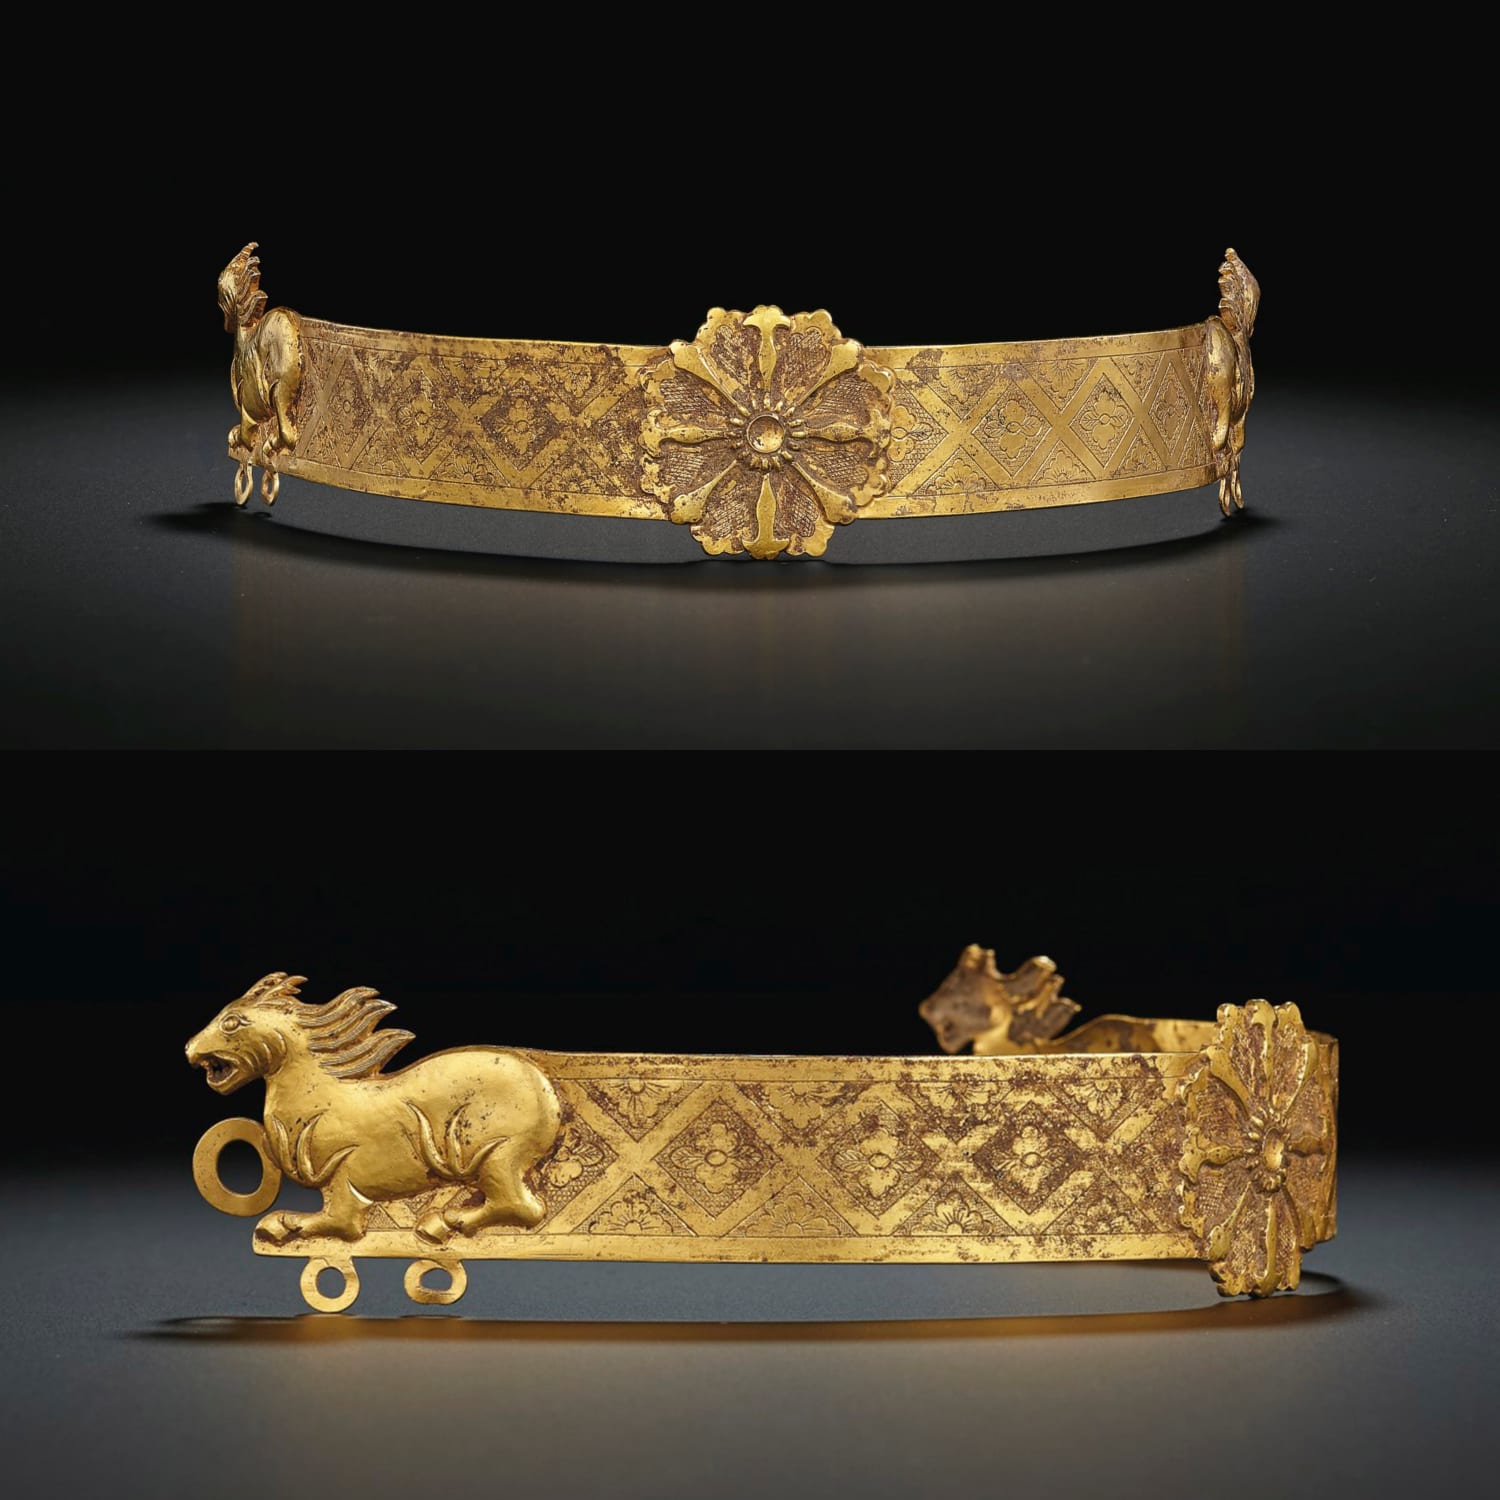 Gold headdress with a galloping horse with antlers. Tang dynasty, China, 618-907